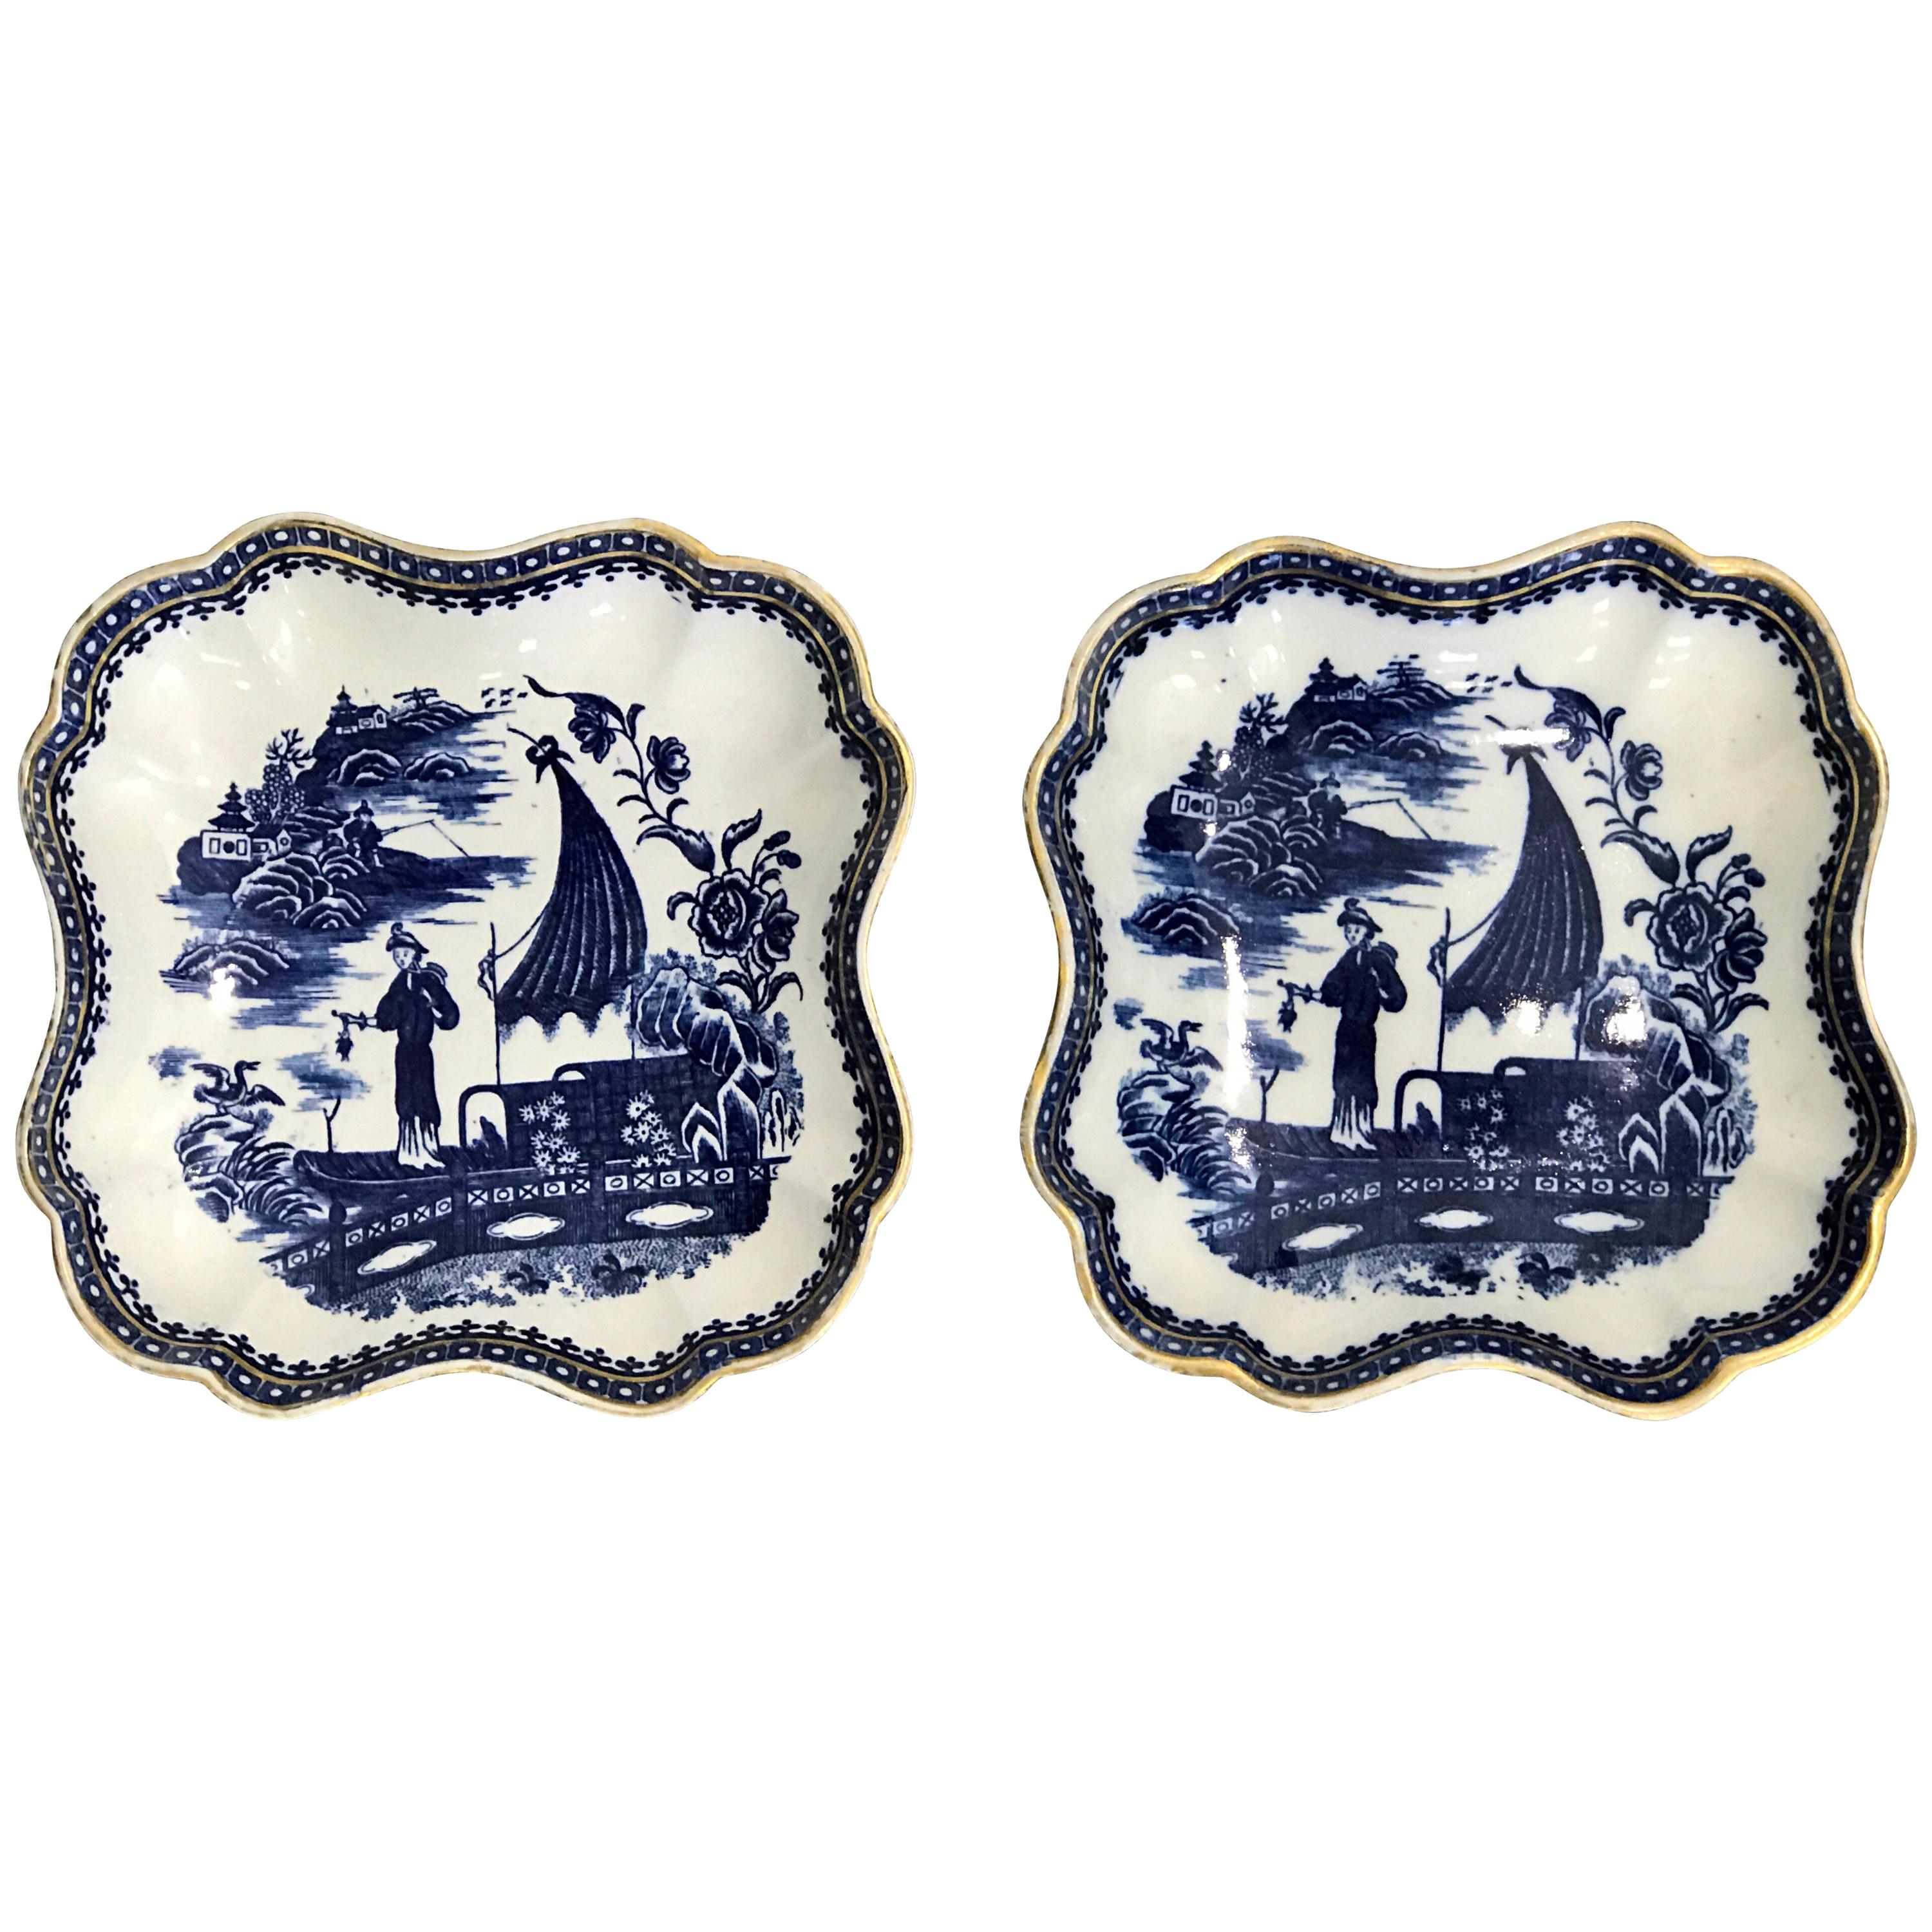 Pair of Antique English Blue and White Chinoiserie Square Bowls by Caughley